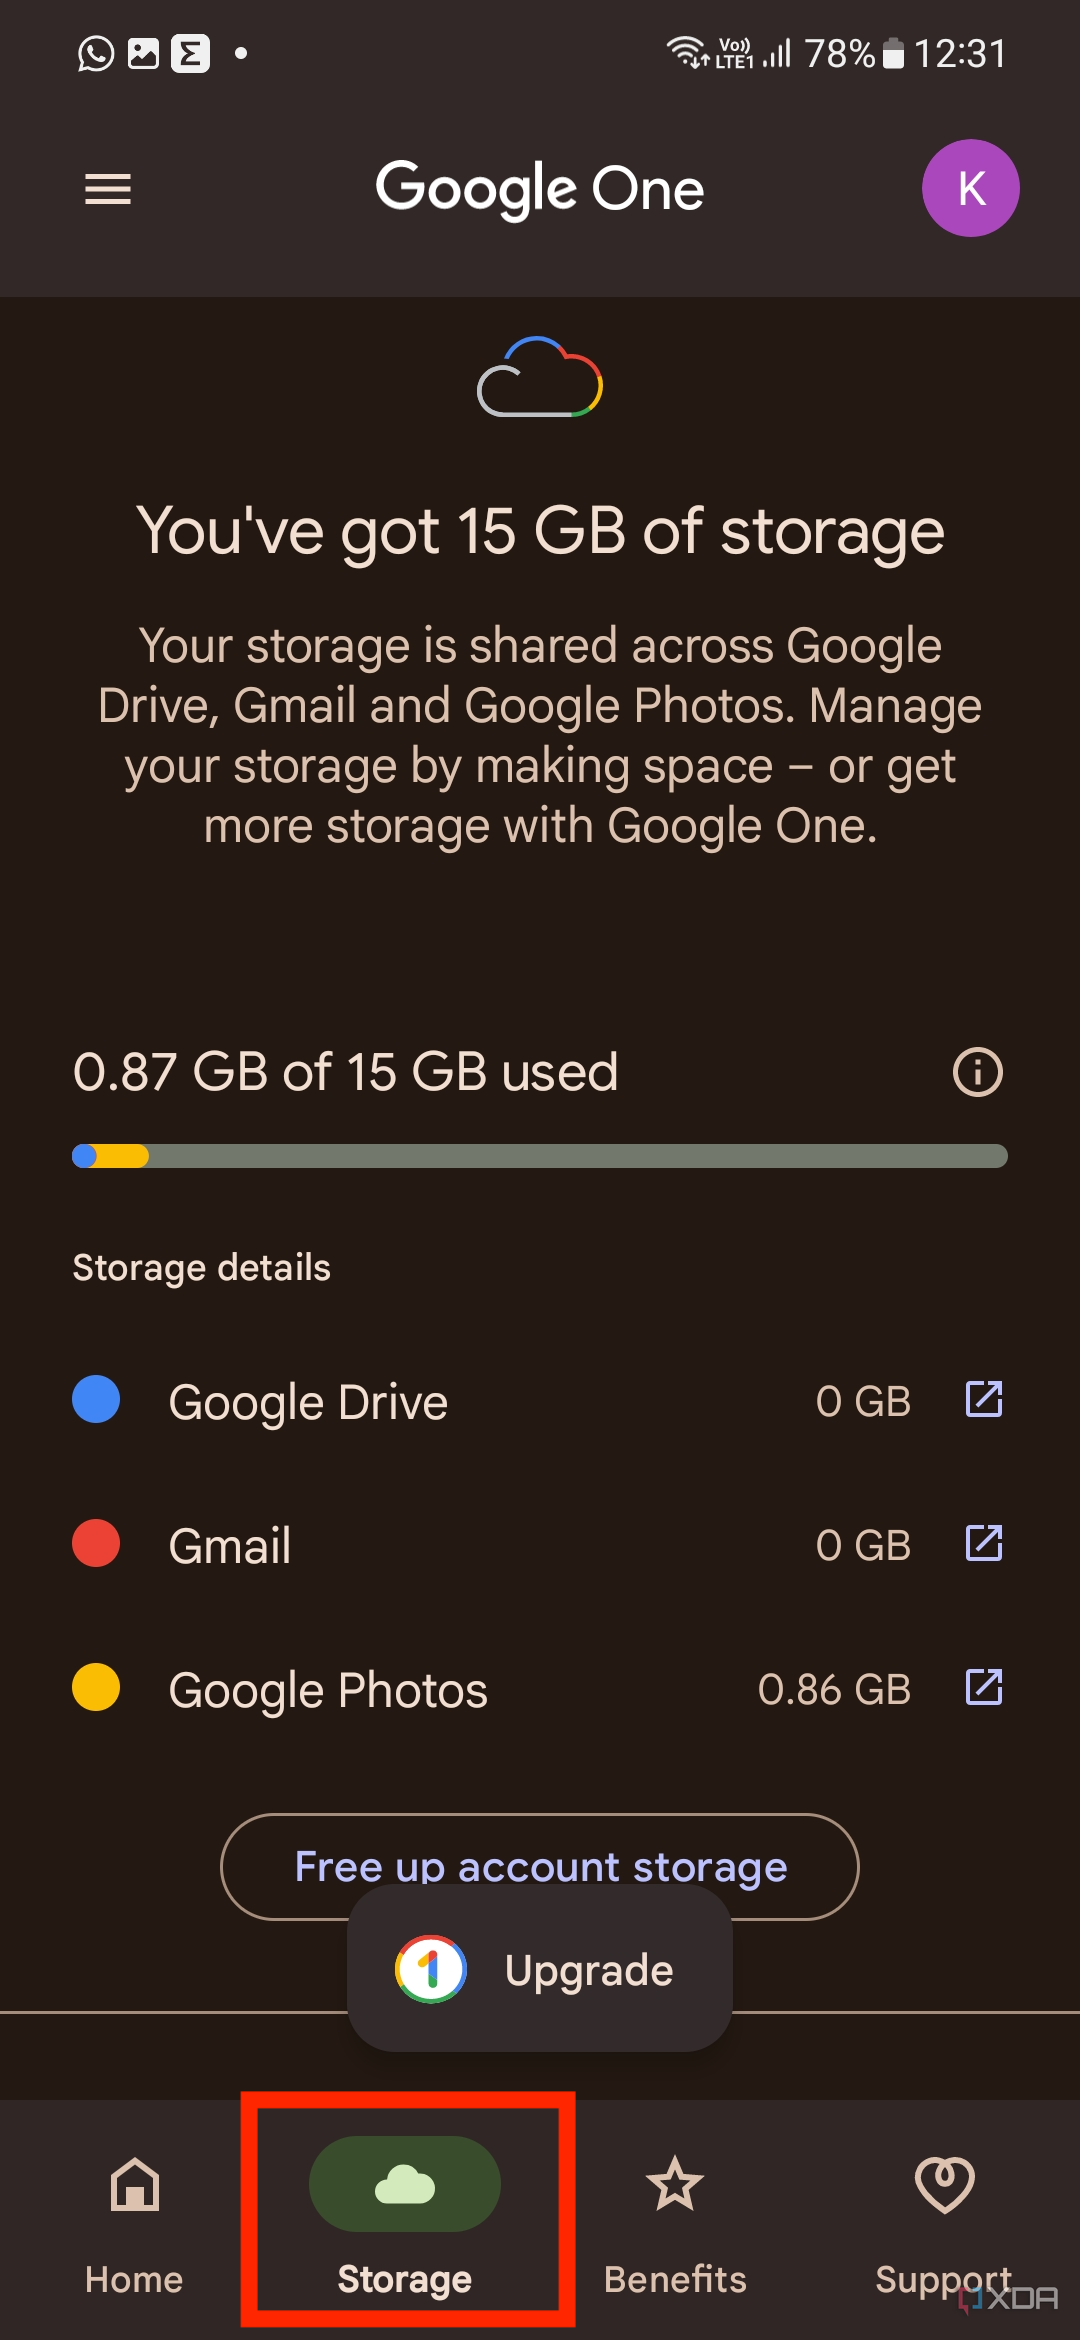 A screenshot showing the Storage details in Google One.